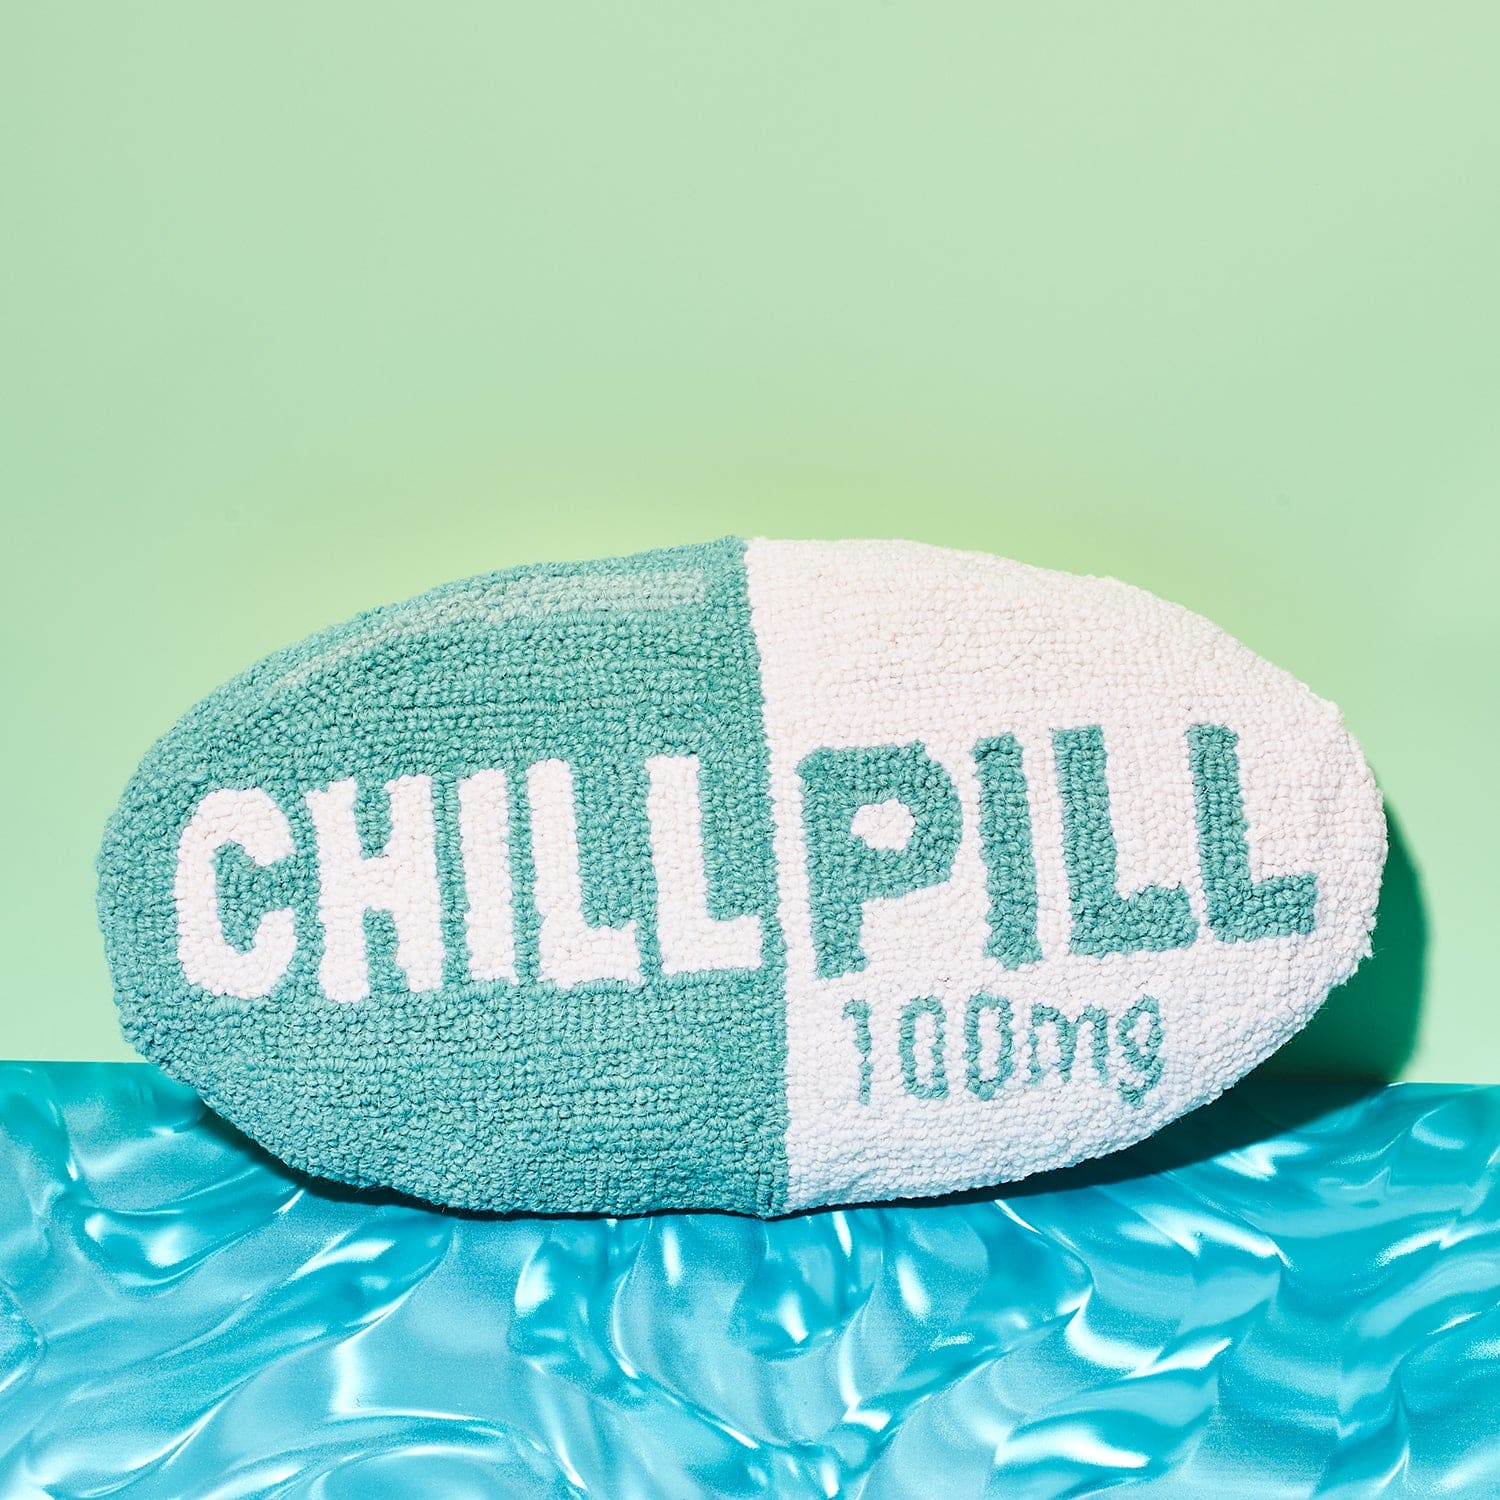 Chill Pill Hook Accent Pillow Aapi Owned - Accent Pillow -